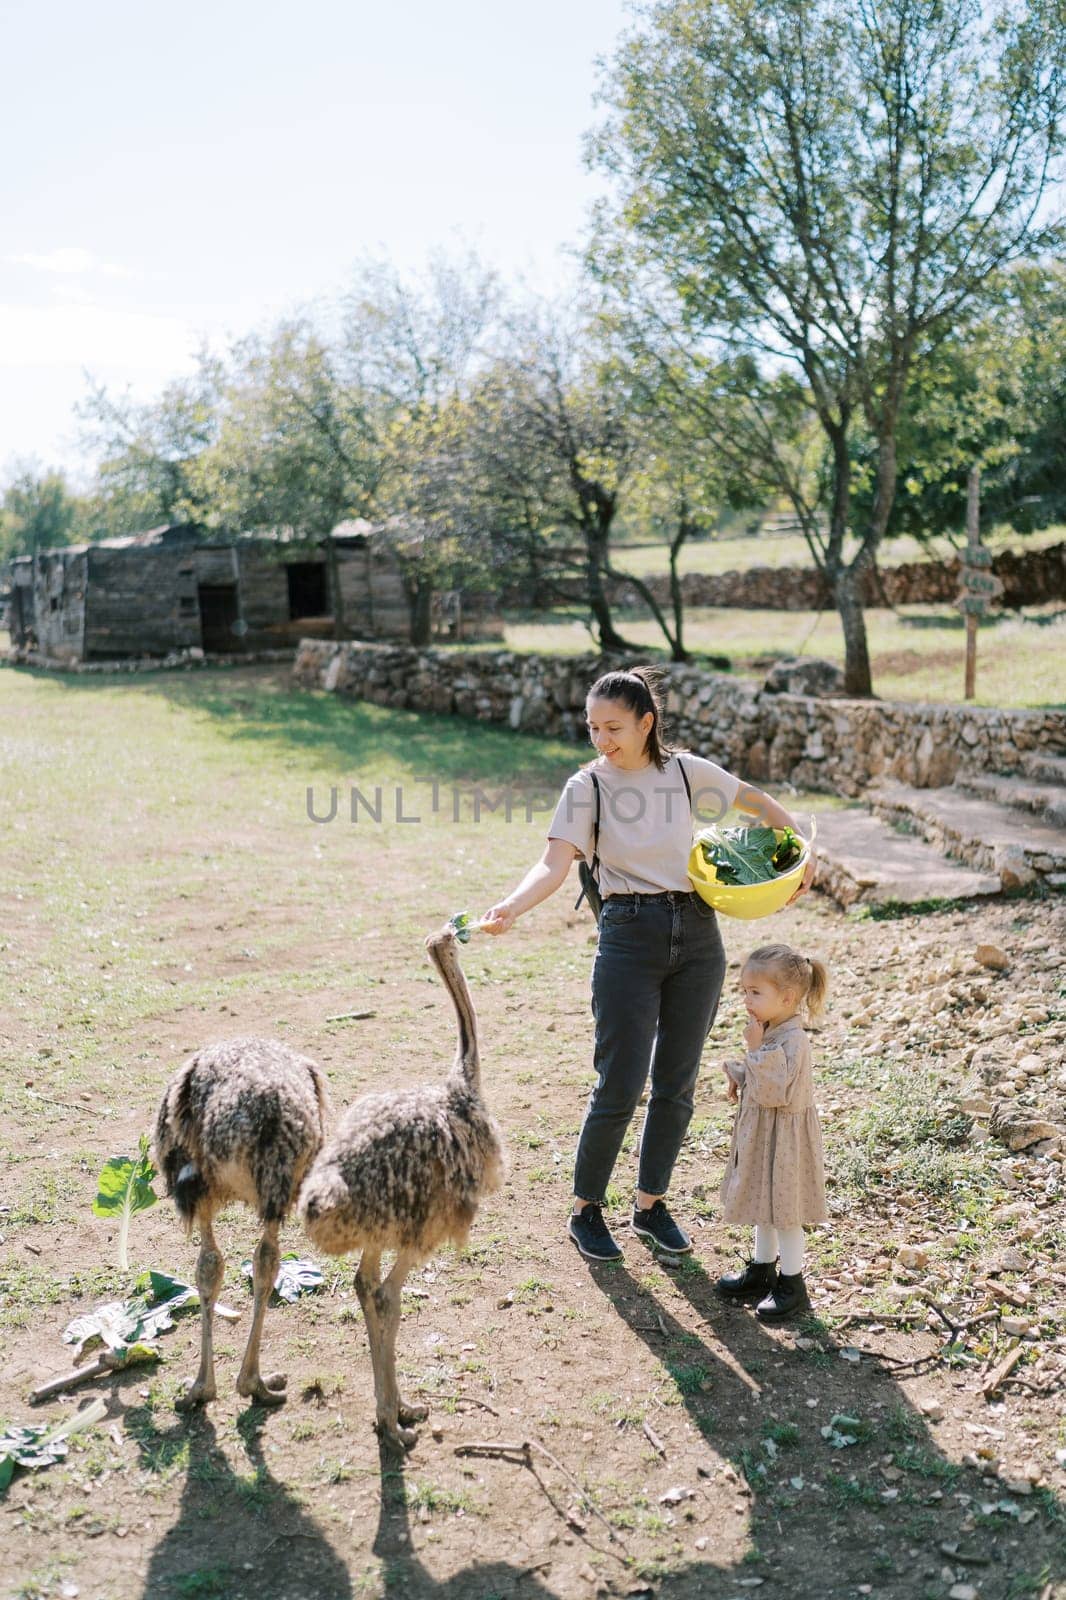 Little girl looks at her mother feeding cabbage leaves to ostriches in a green park. High quality photo